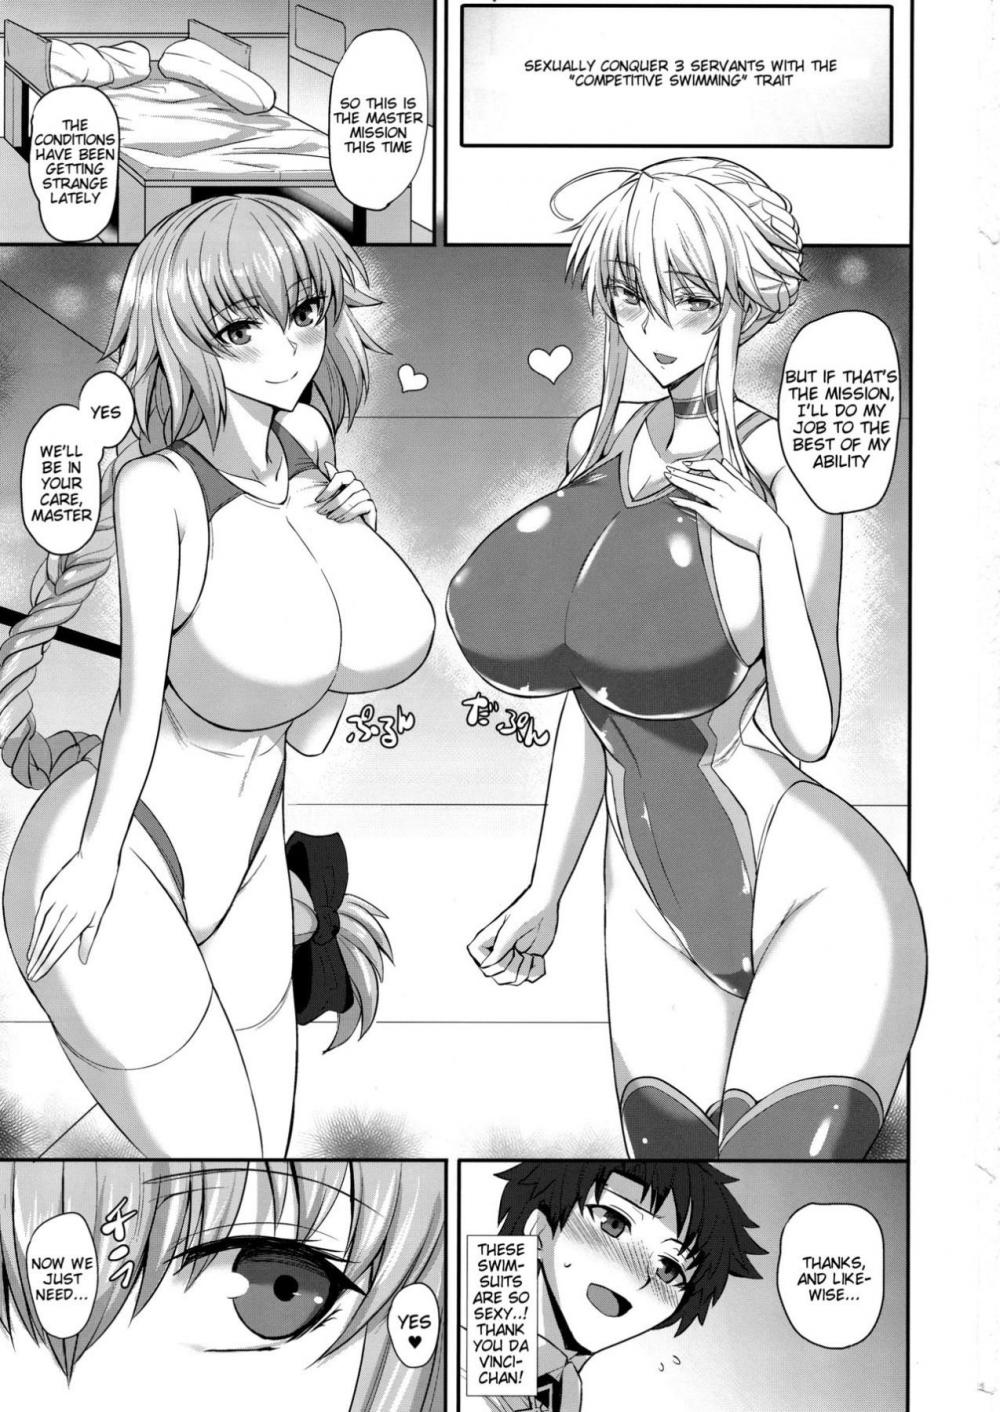 Hentai Manga Comic-A "Swimming Race" With My Special Servant-Read-2